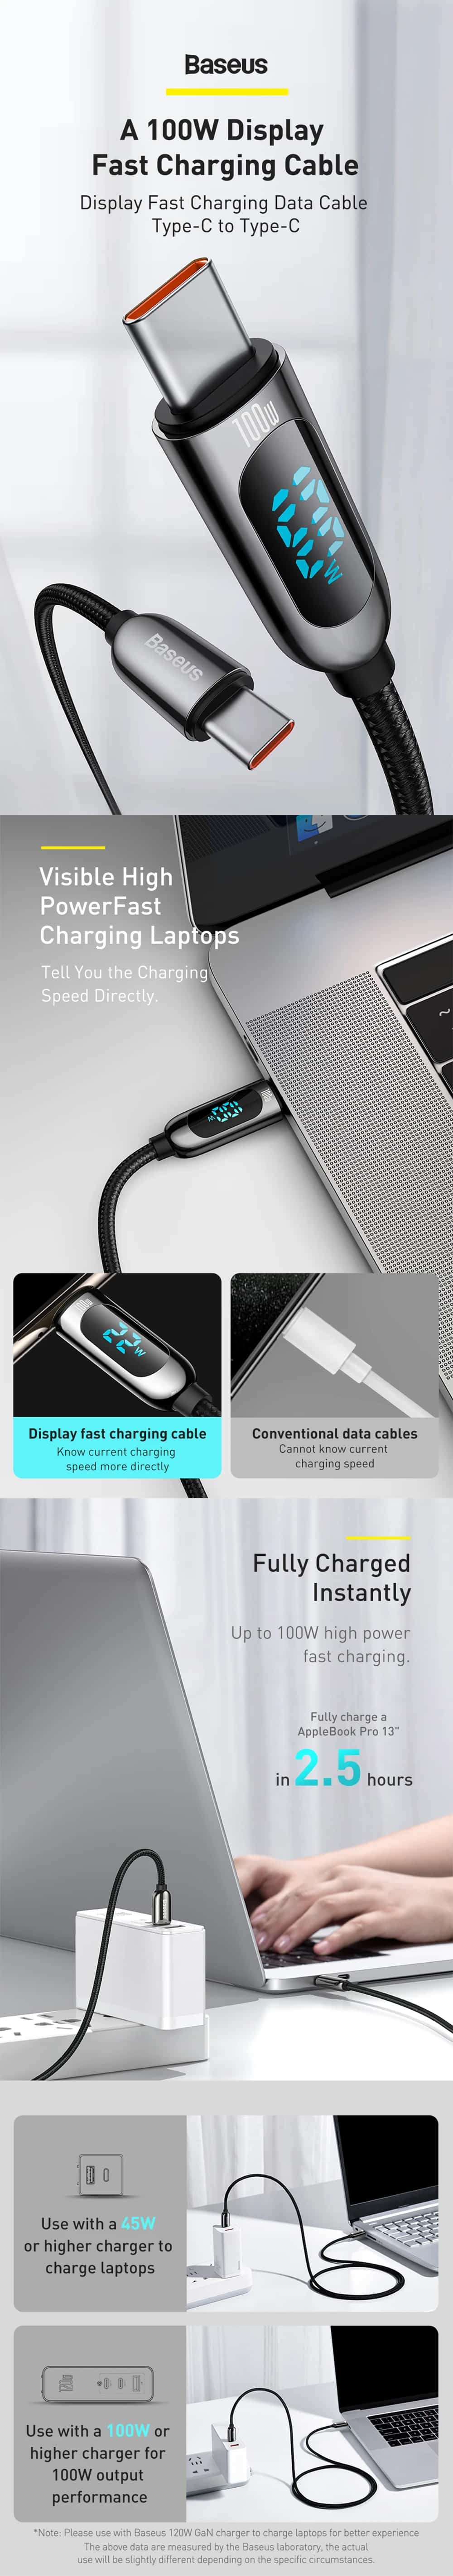 Baseus Display Fast Charging Type C to Type C Data Cable 100W 4